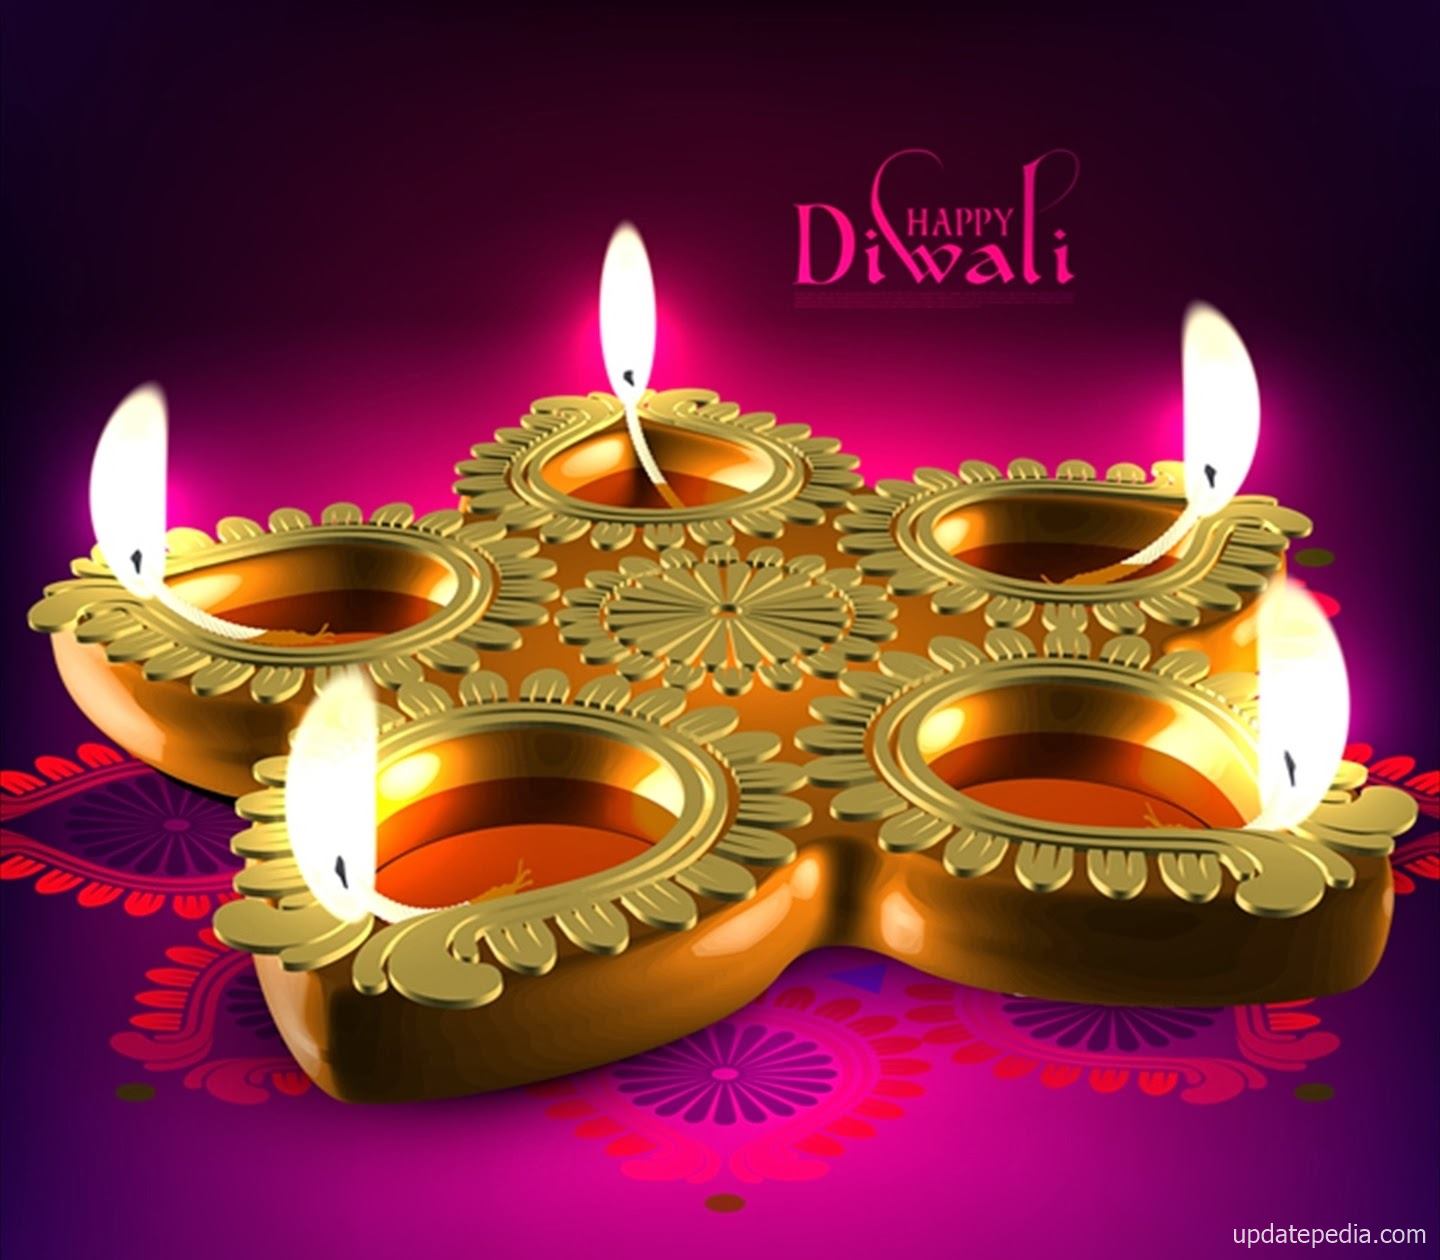 Free download 101 Happy Diwali Greeting Images Wishes Pictures ...